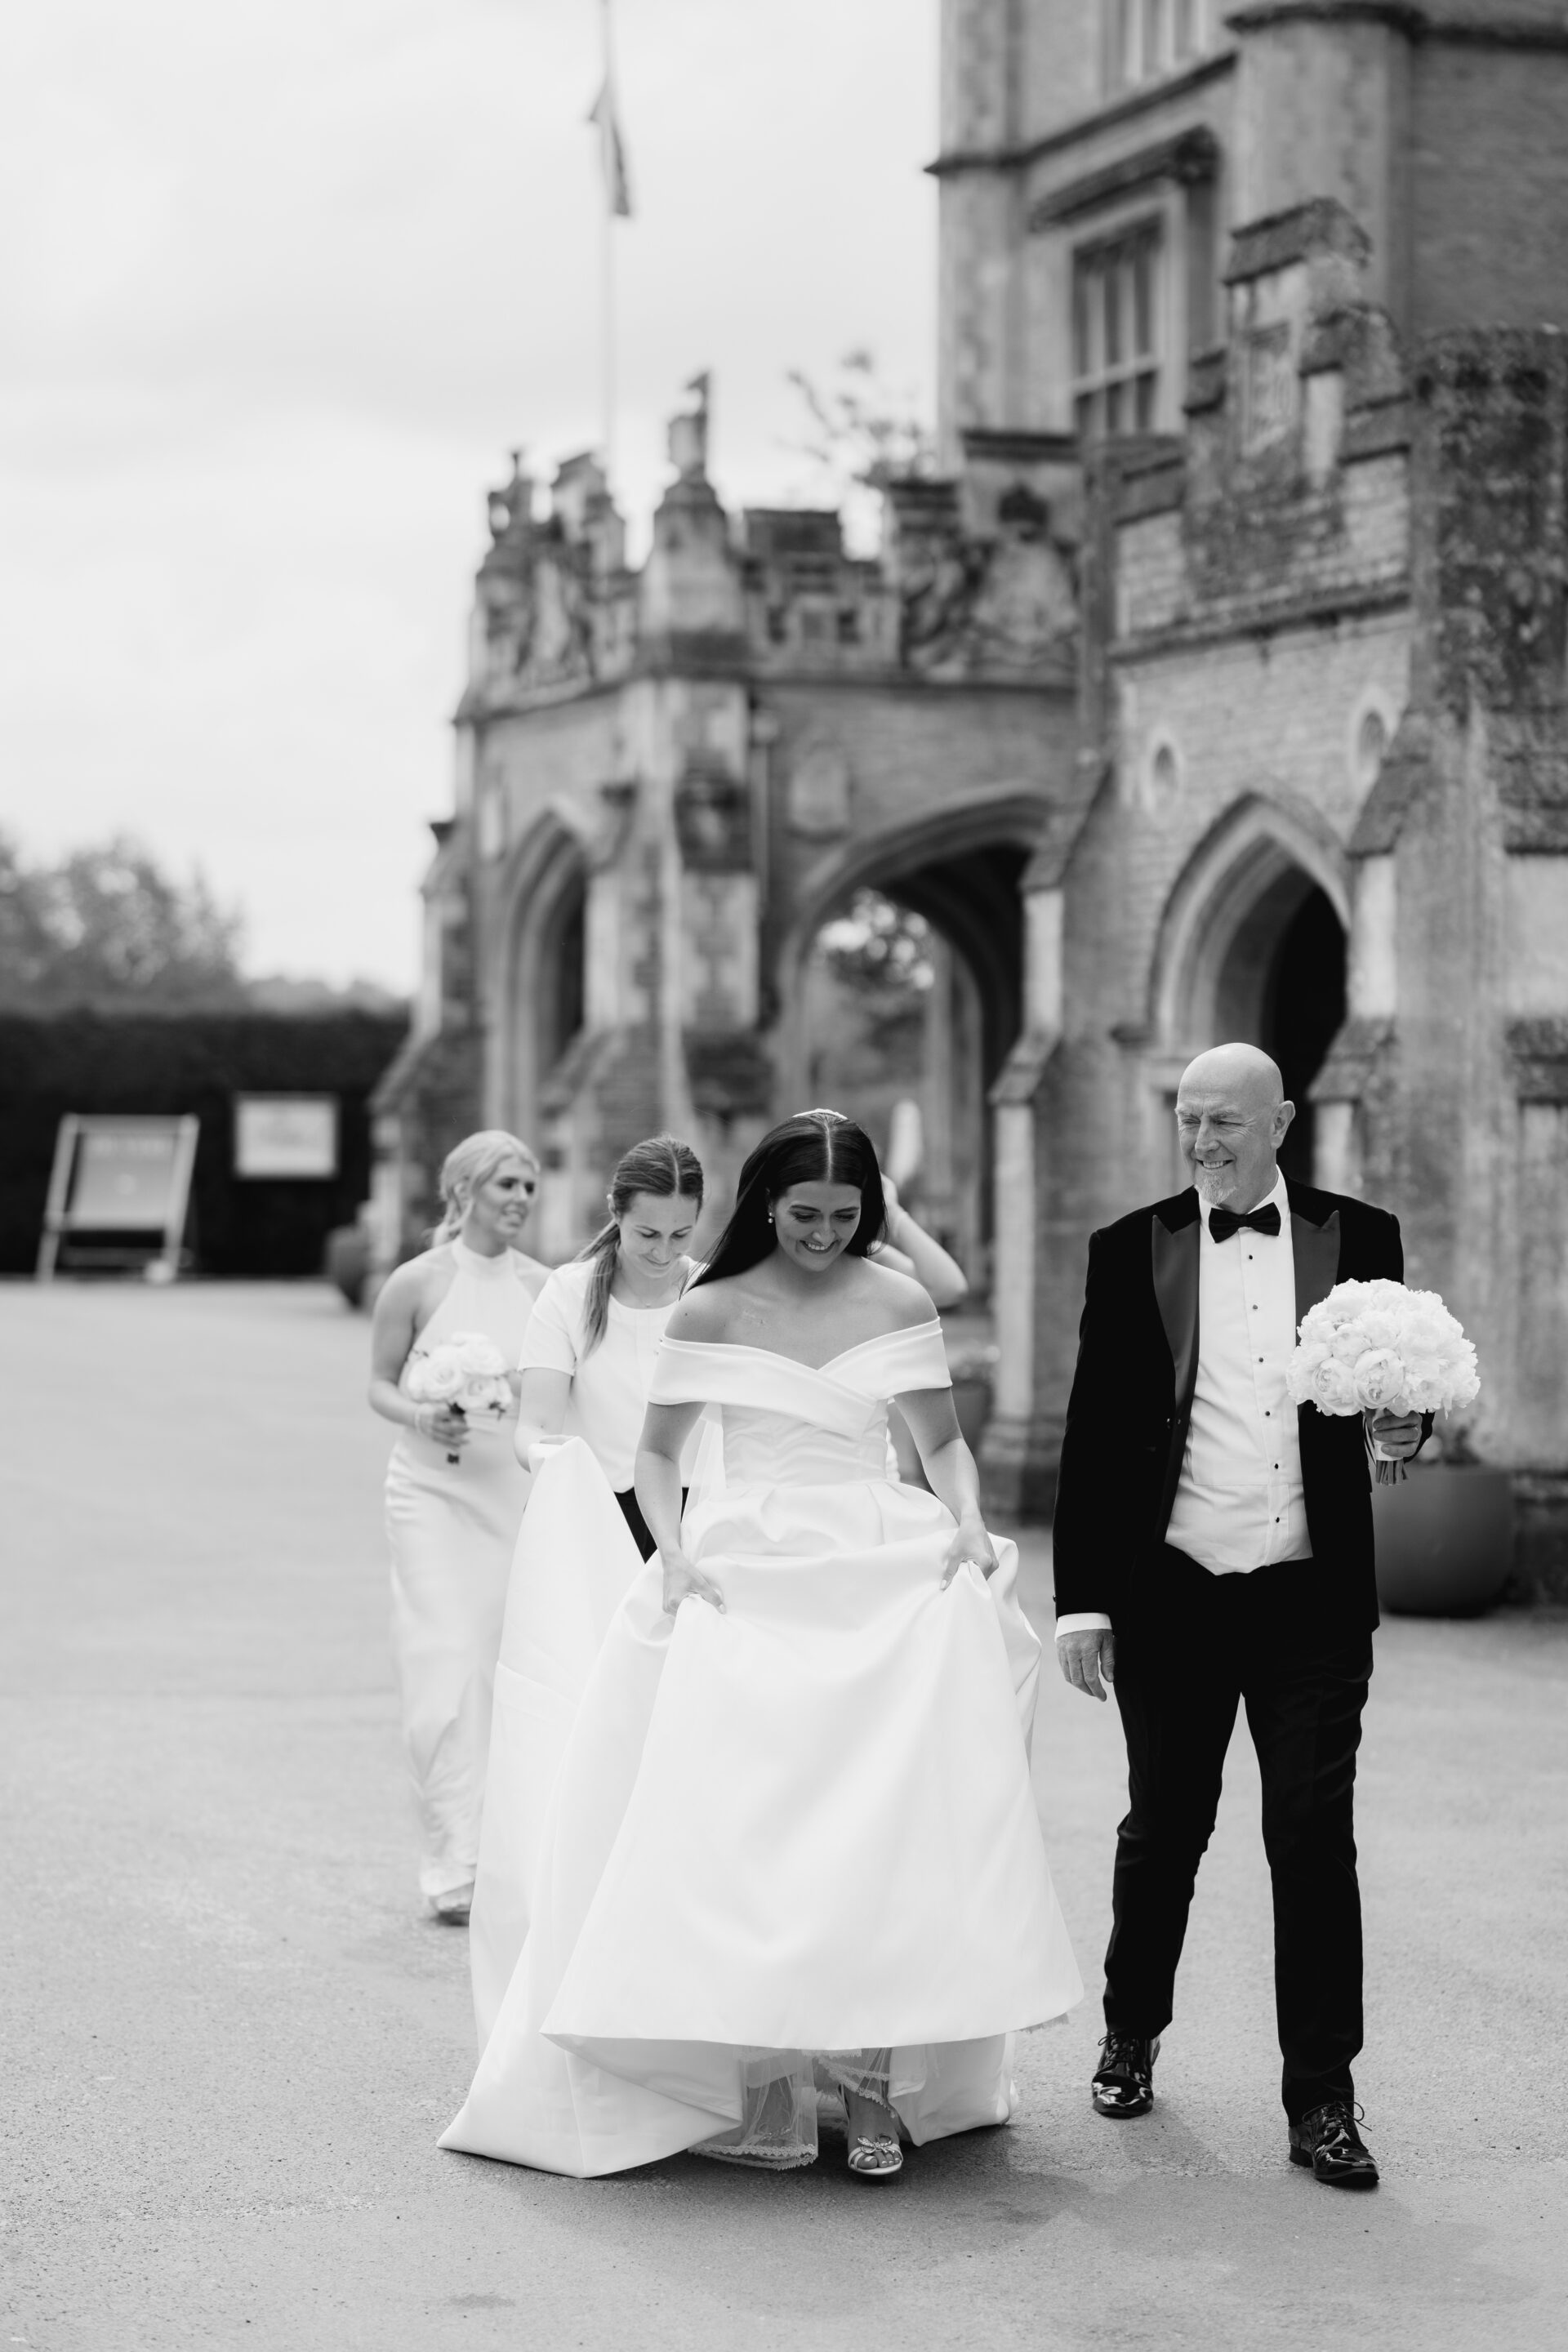 The bride walks to her wedding ceremony with her father and bridesmaids at Tortworth Court